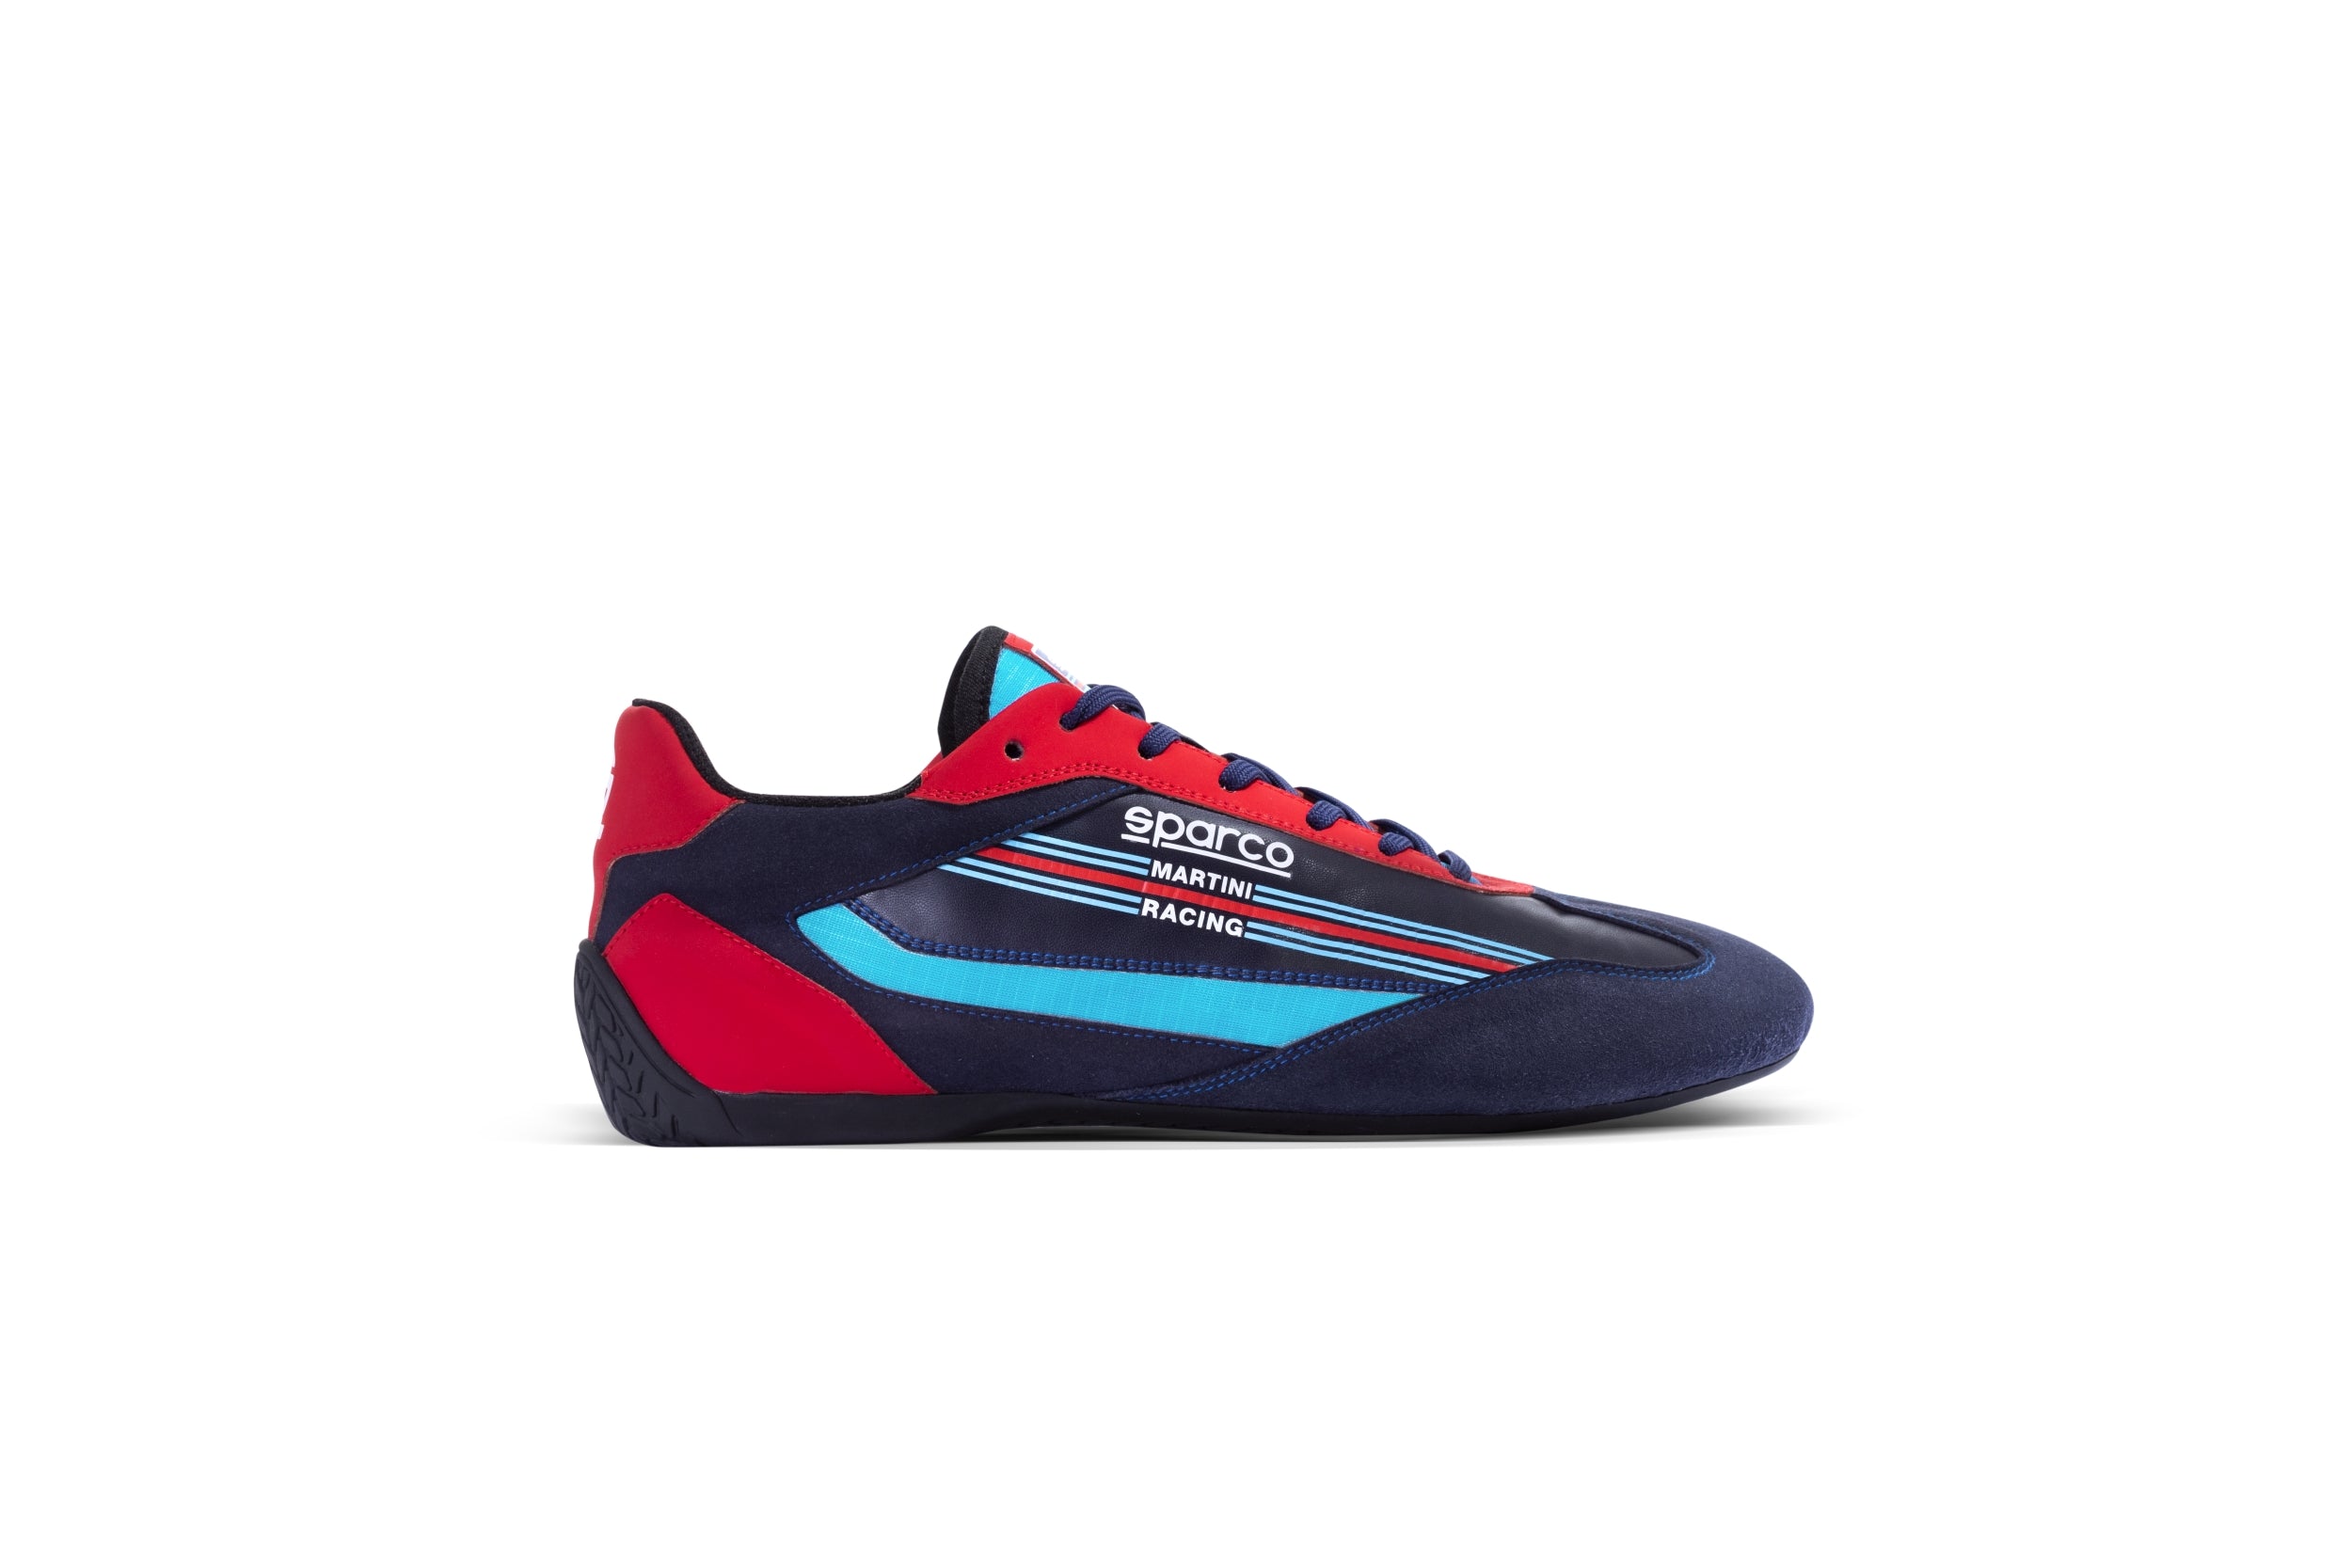 SPARCO 0012A7MR45BM S-DRIVE MARTINI RACING Sneakers shoes, navy blue, size 45 Photo-2 